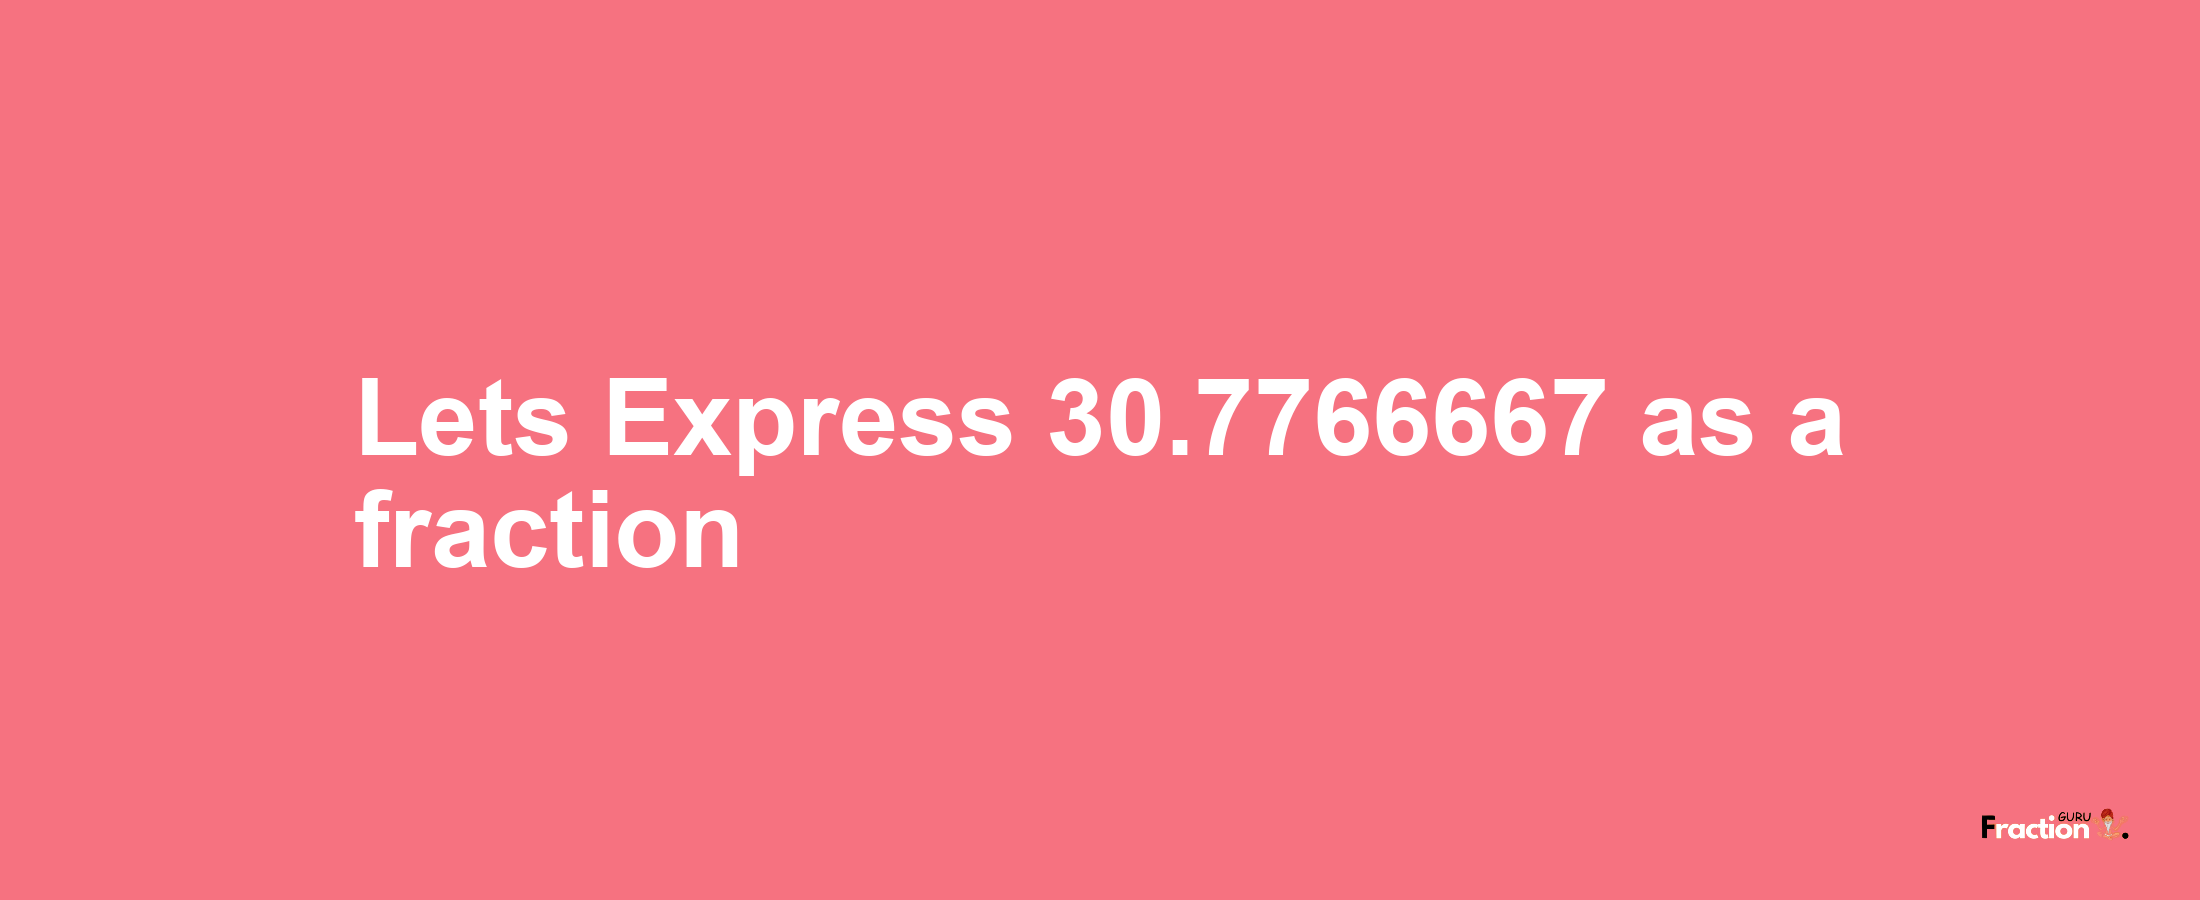 Lets Express 30.7766667 as afraction